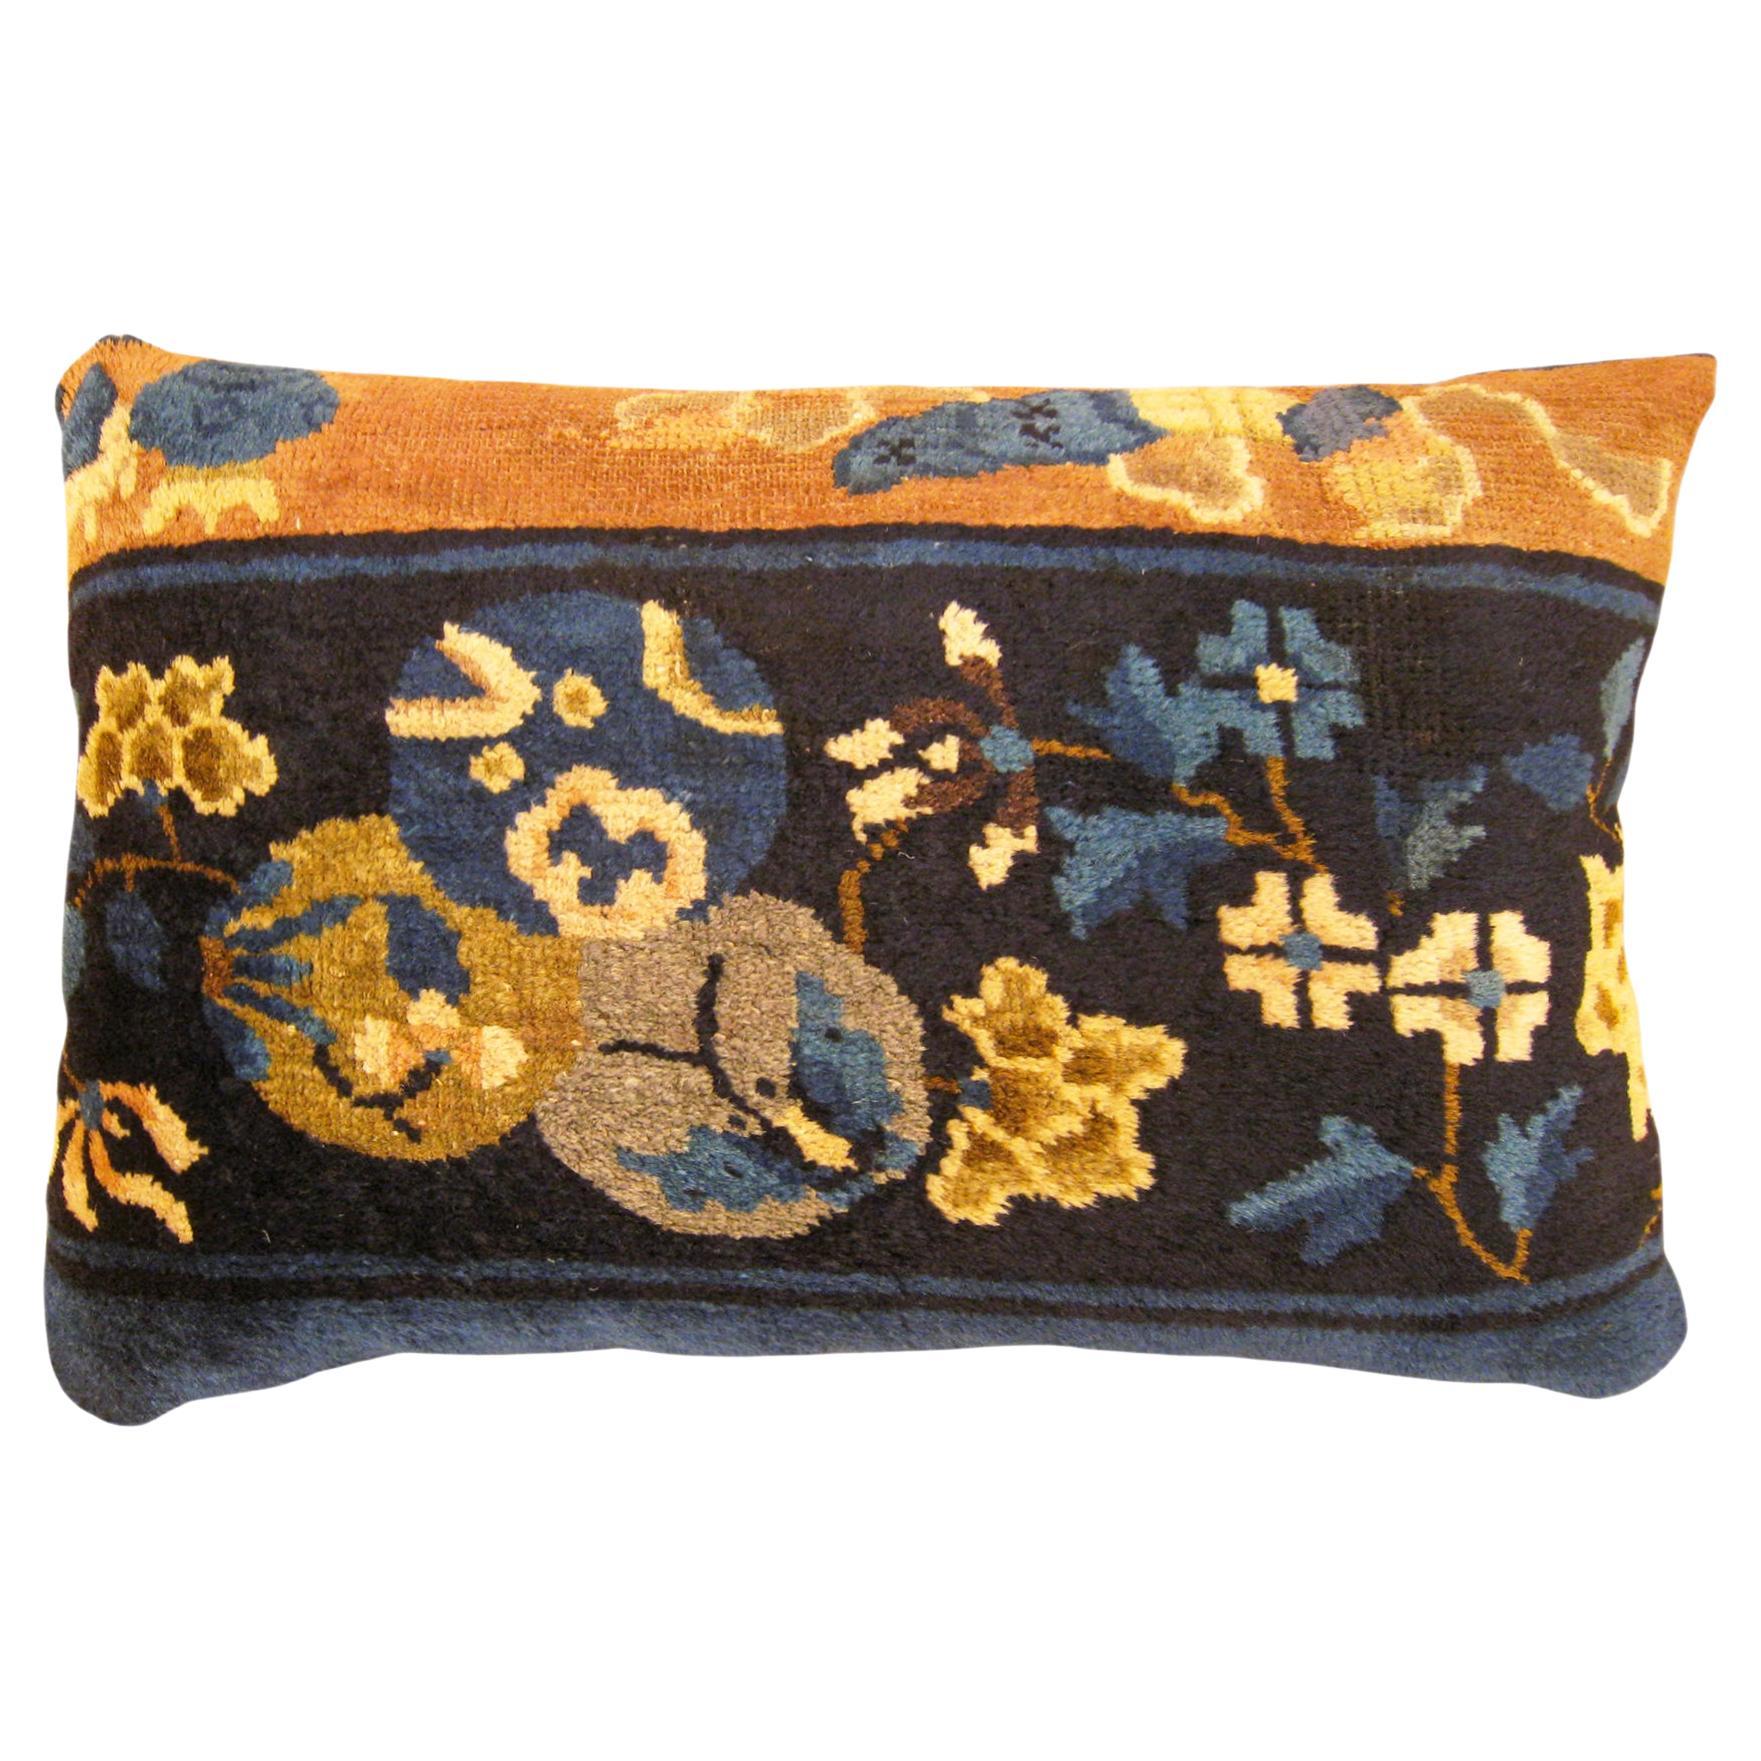 Decorative Antique Chinese Pillow Rug with Floral Elements  For Sale